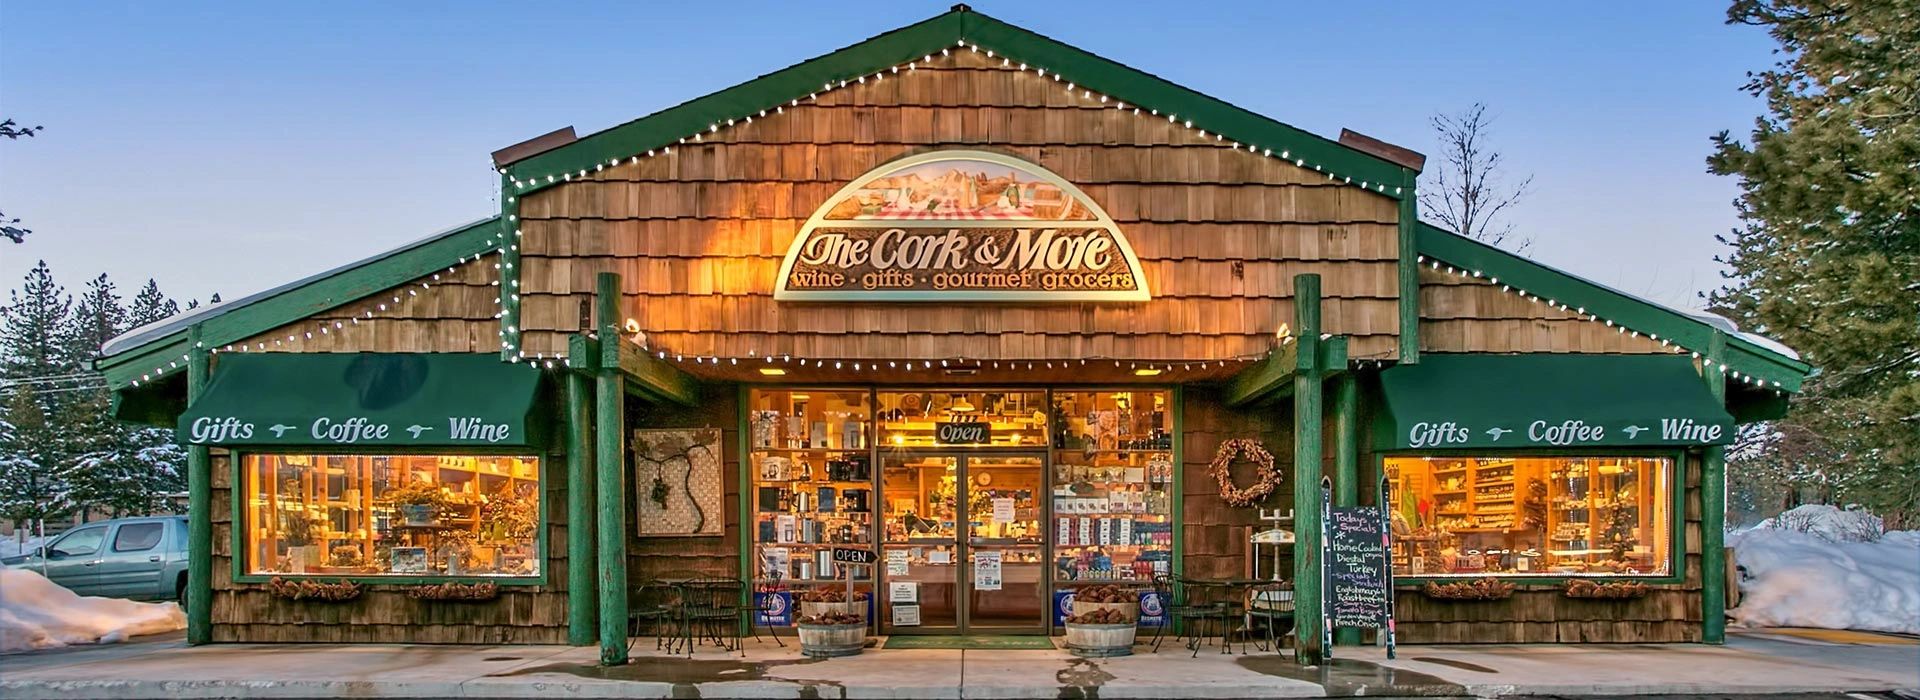 The Cork & More in Lake Tahoe — deli, wines, cheeses, and gifts.